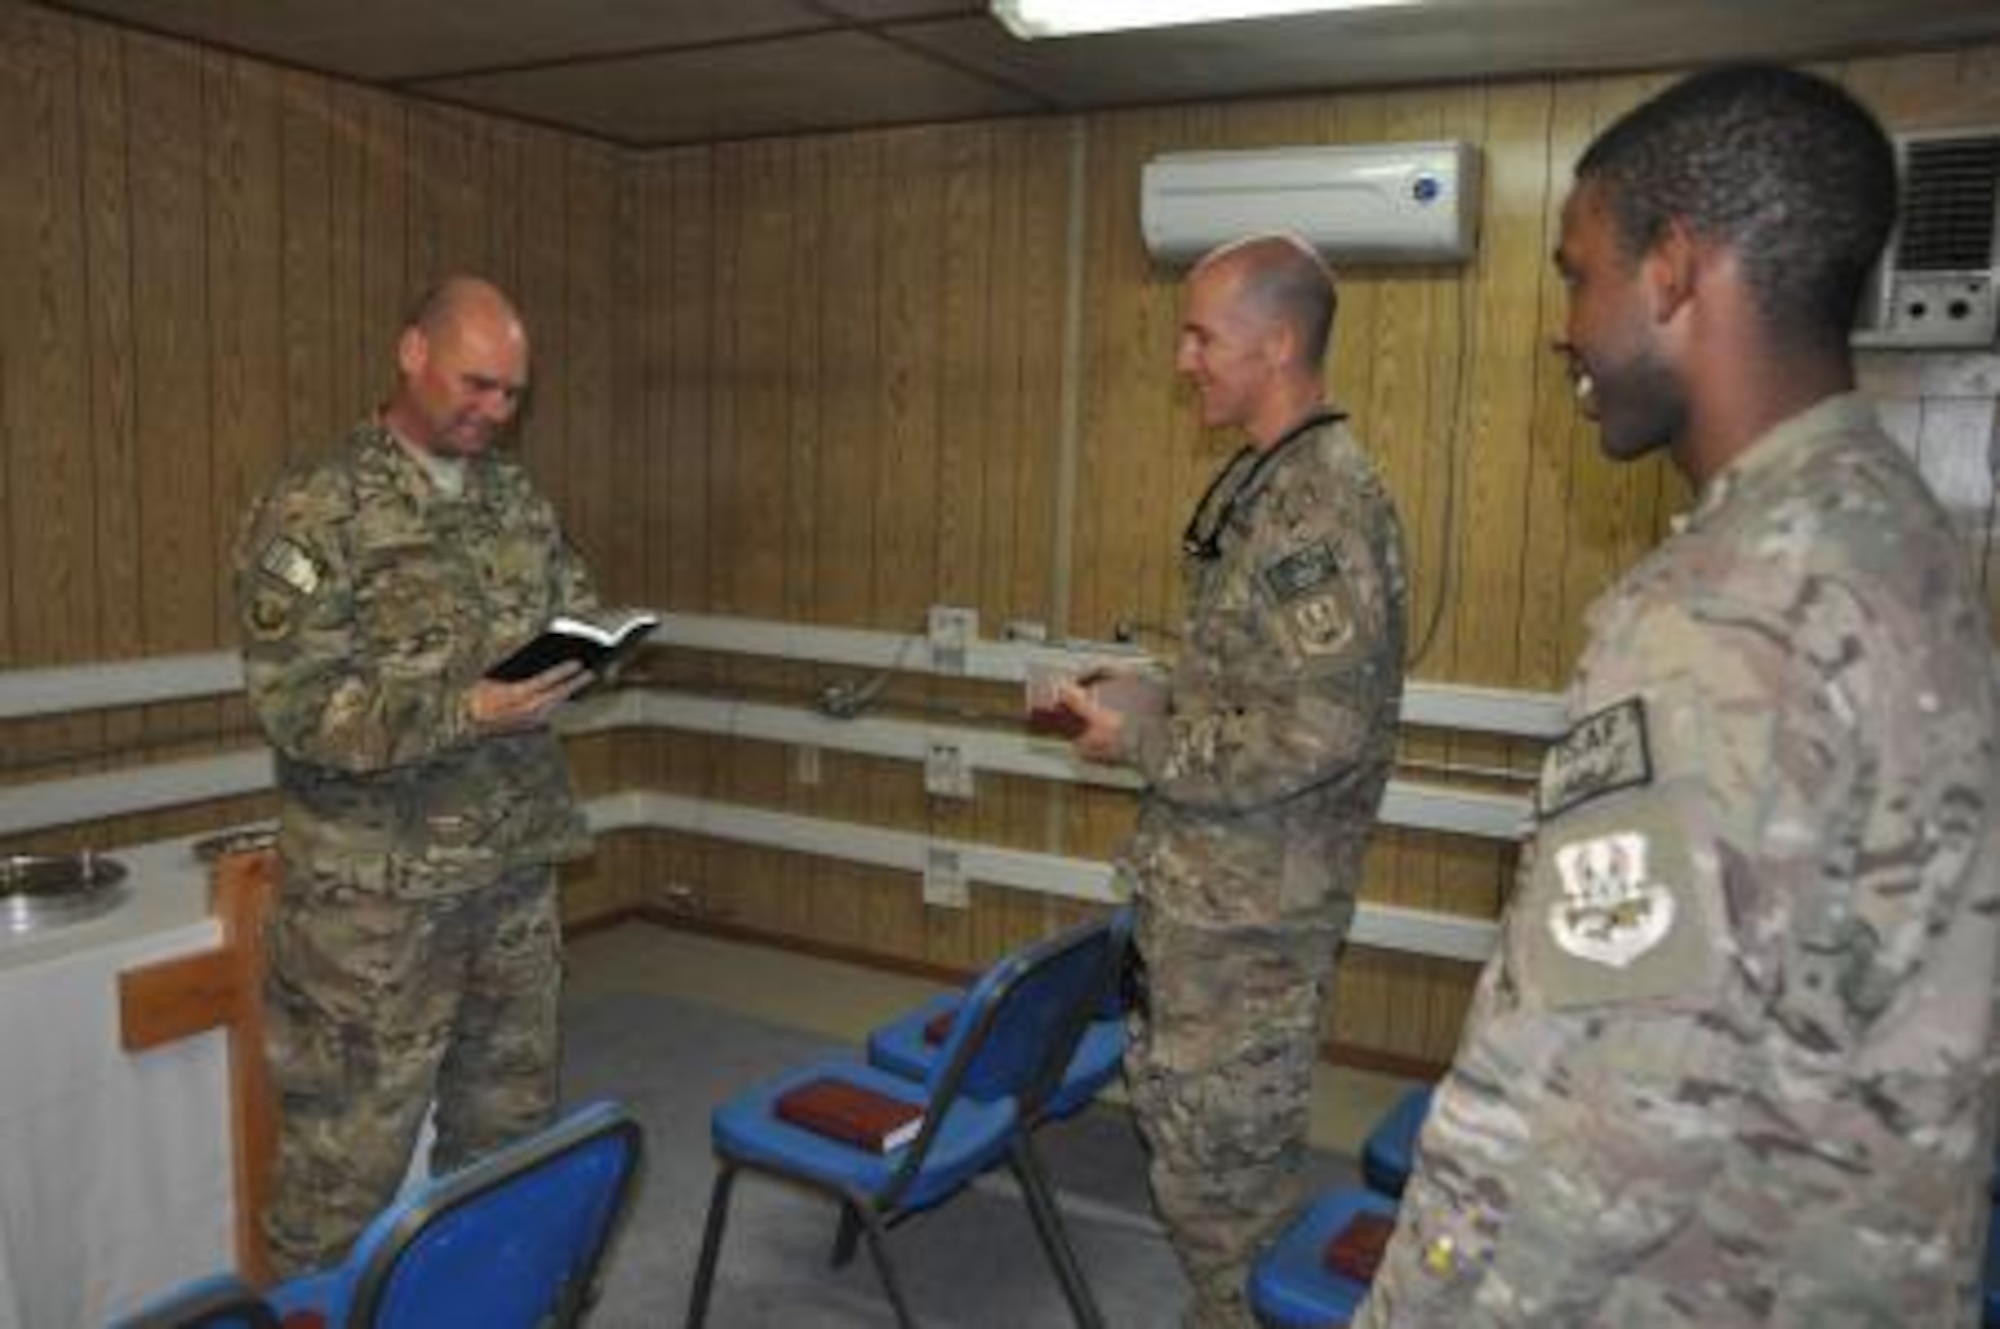 Chaplain (Maj.) Gary Coburn, 455th Air Expeditionary Wing deputy wing chaplain, speaks to Lt. Col. Daniel Hendrix, 41st Expeditionary Electronic Combat Squadron, and Senior Airman Jeremie Bumpers, 455th Expeditionary Maintenance Squadron, during a non-denominational Christian worship service at the Bagram Airfield flightline chapel Oct. 20, 2013. (U.S. Air Force photo/Tech. Sgt. Rob Hazelett)
